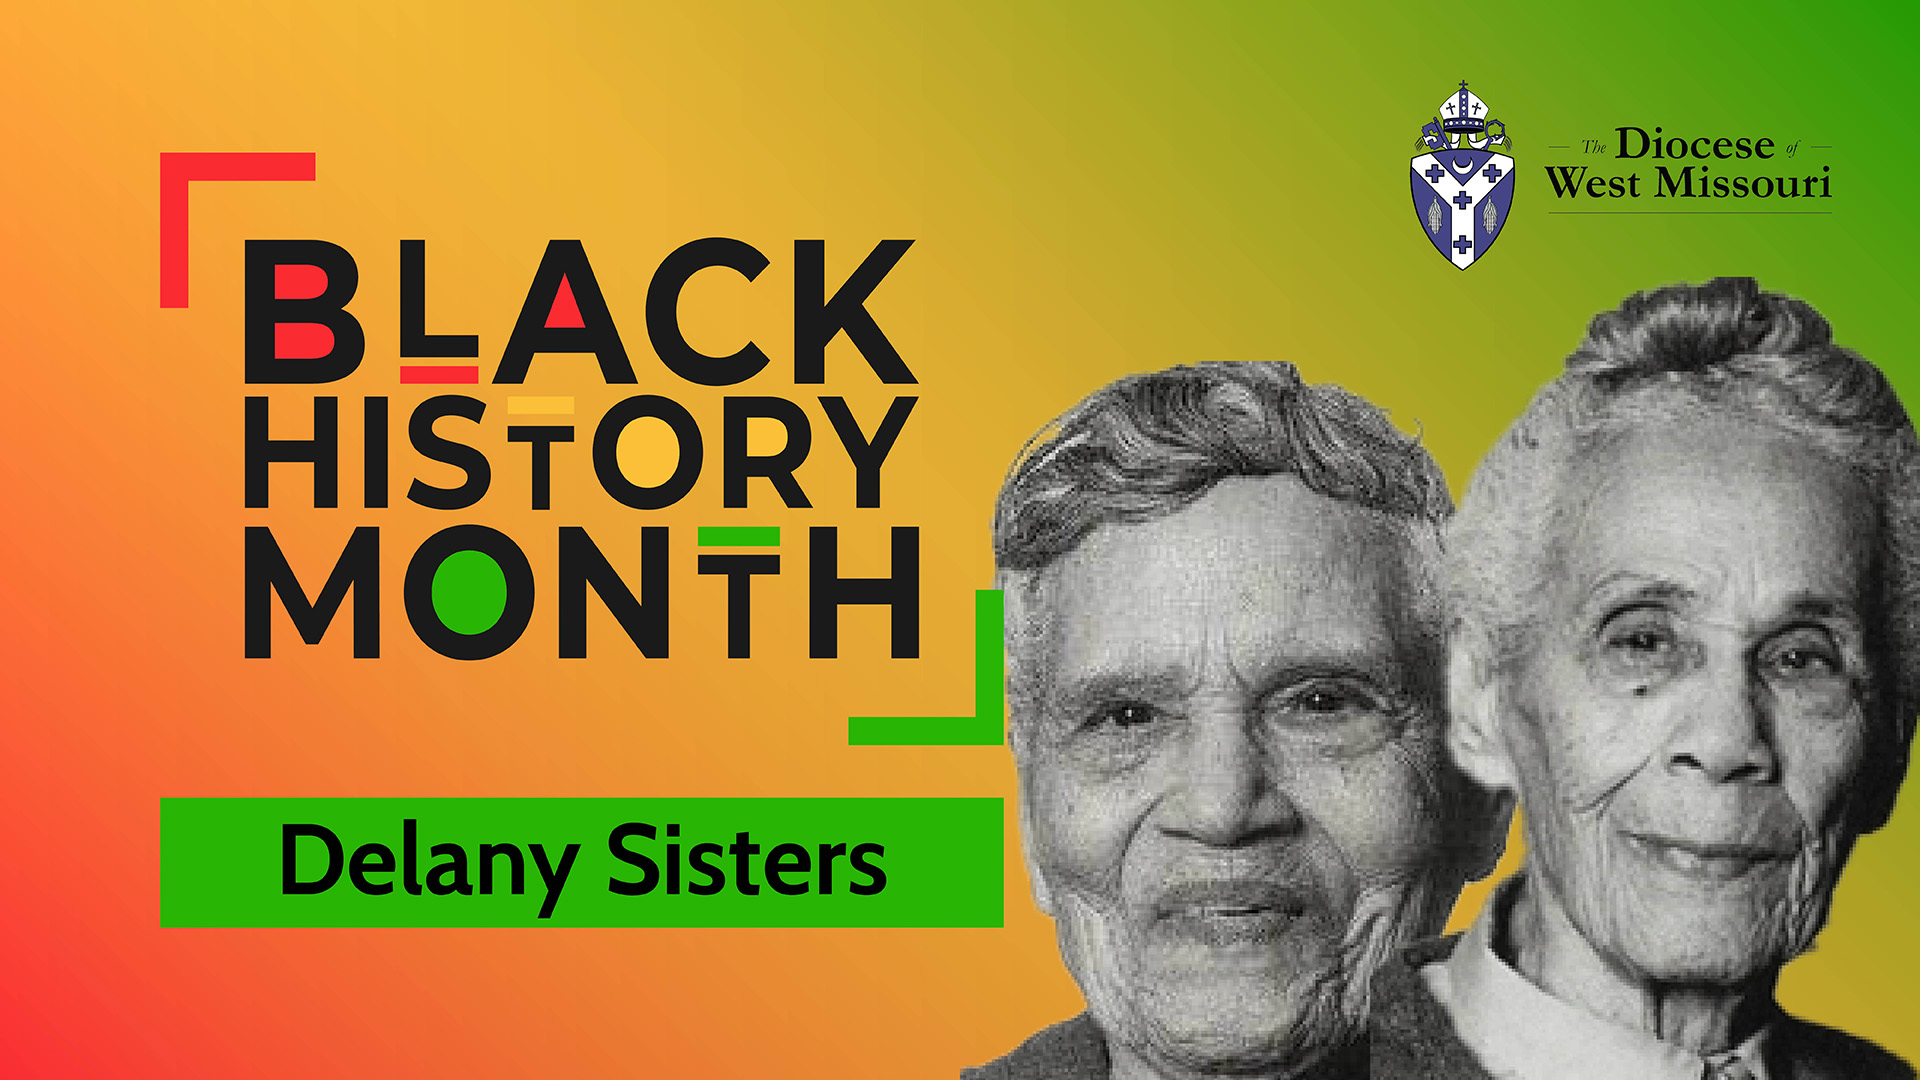 Black History Month: The Life of the Delany Sisters